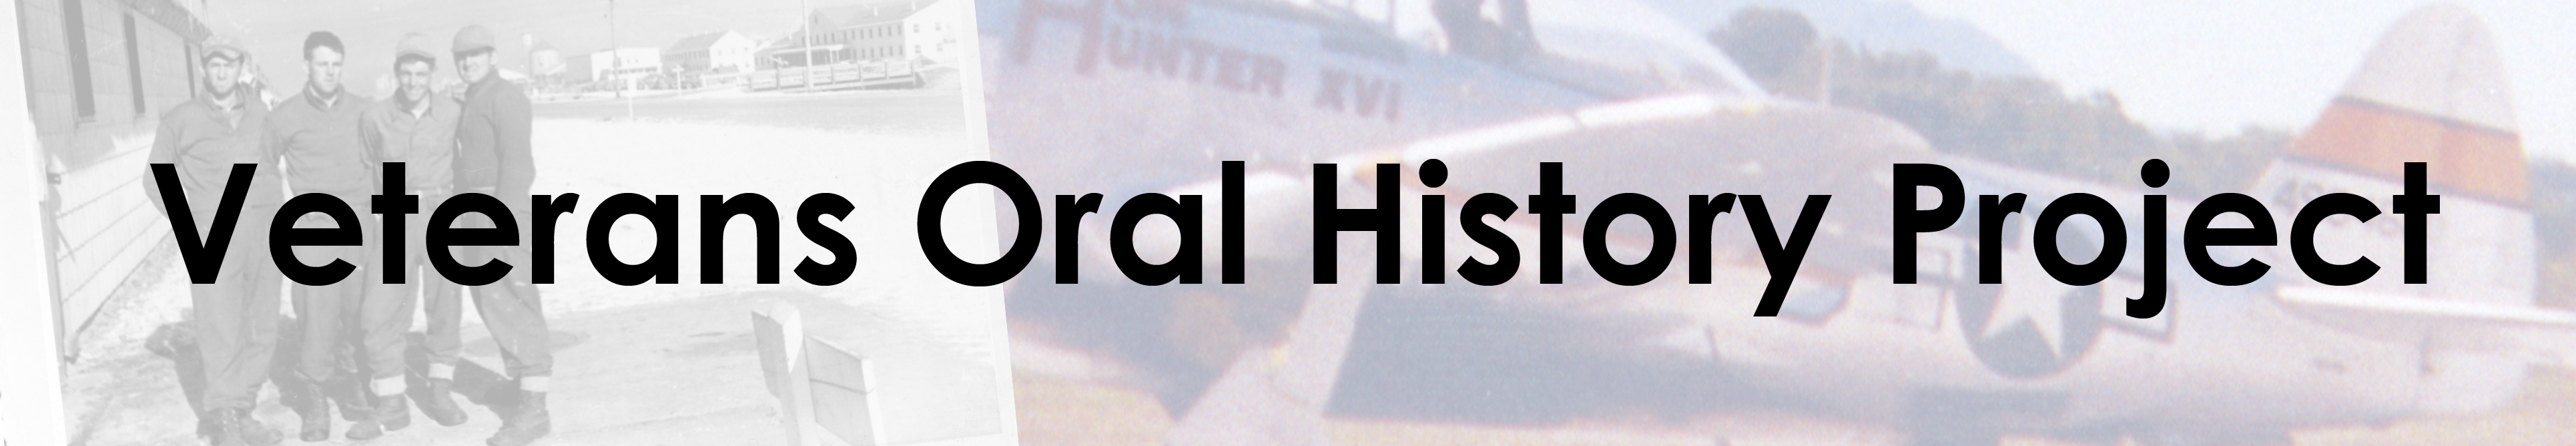 Veterans Oral History Project